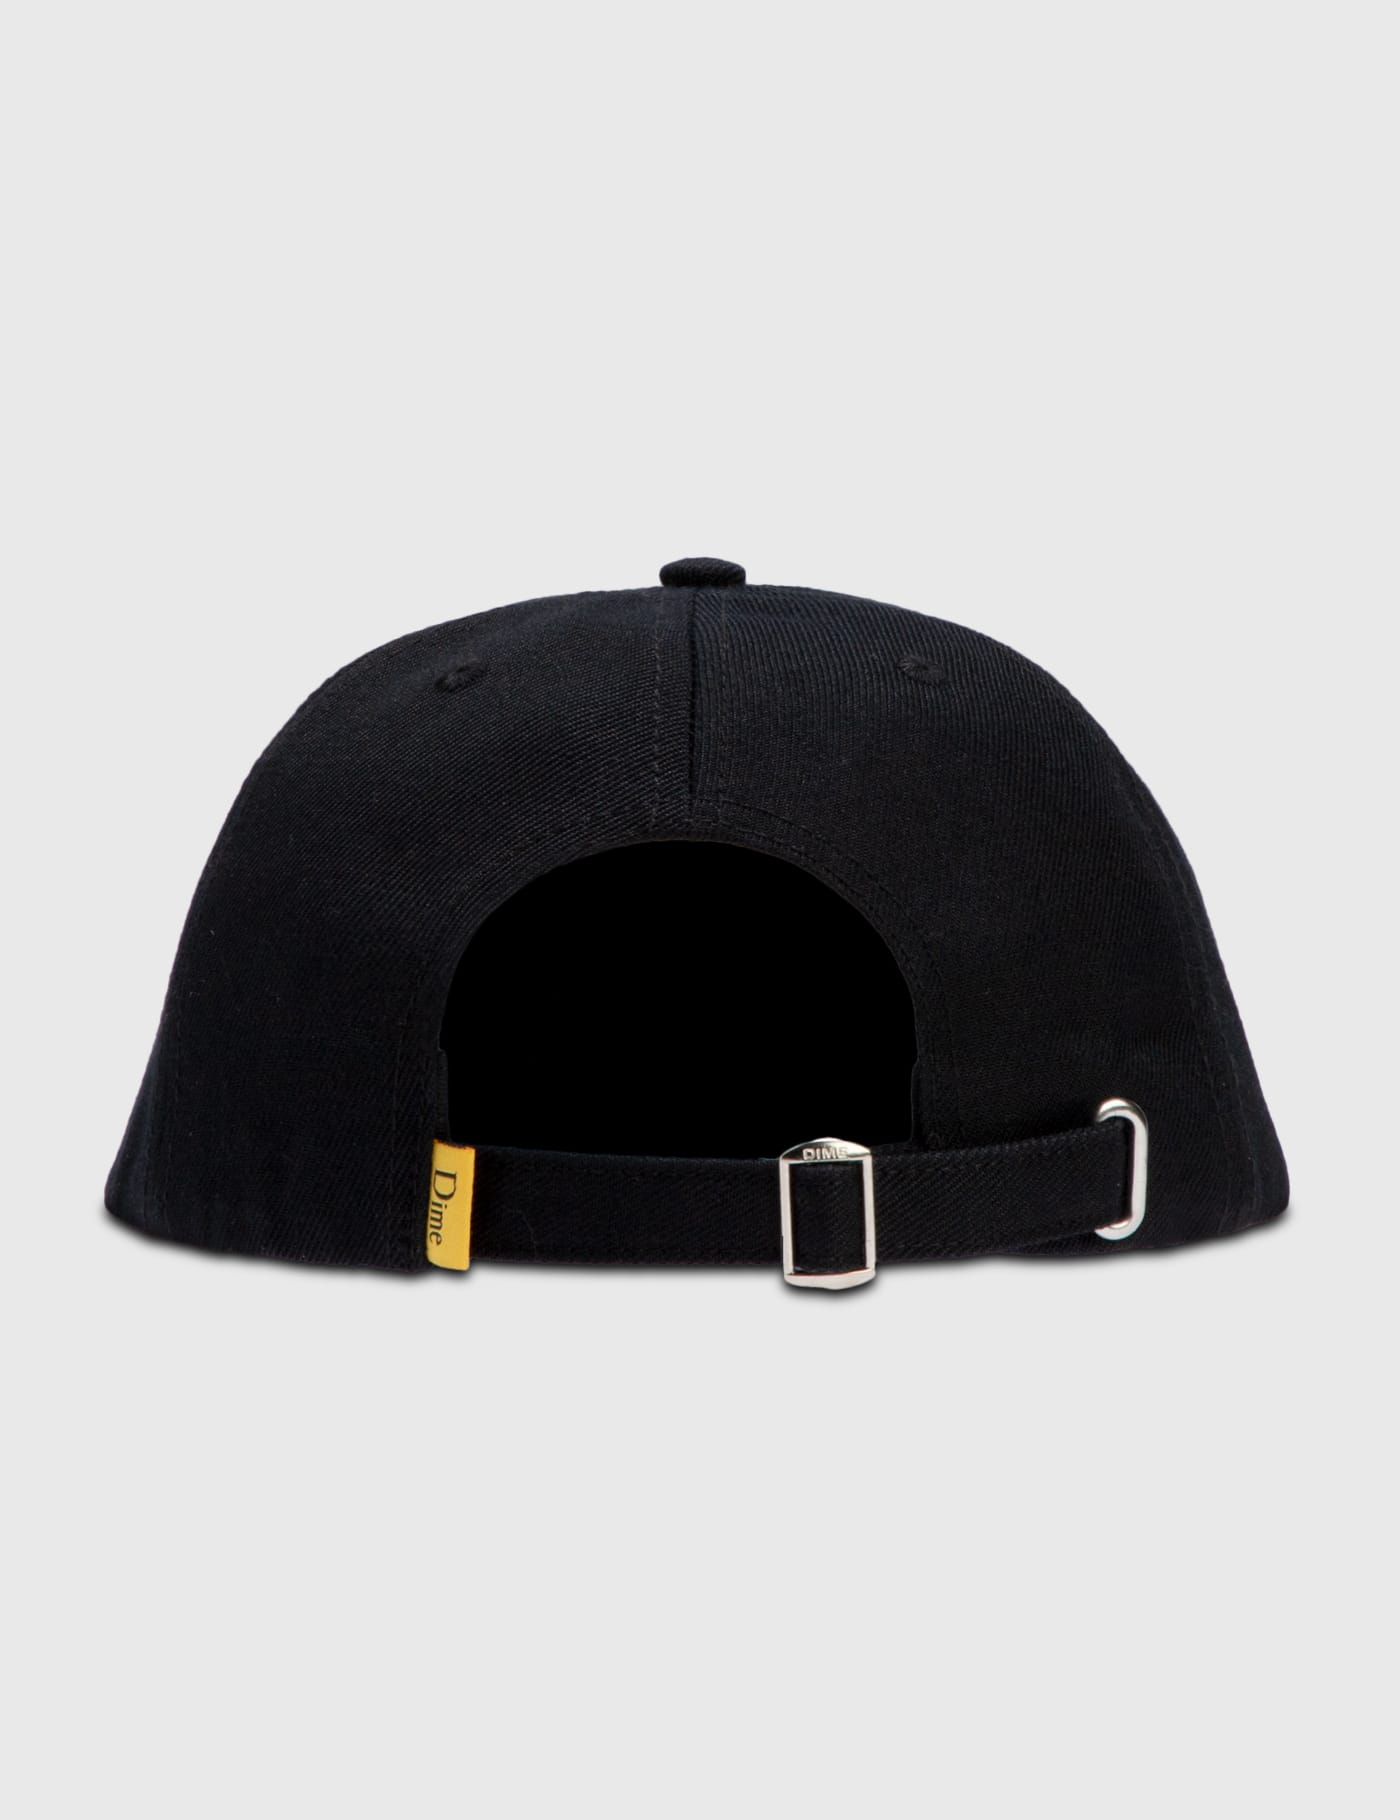 Dime - Dime Classic Wool Cap | HBX - Globally Curated Fashion and